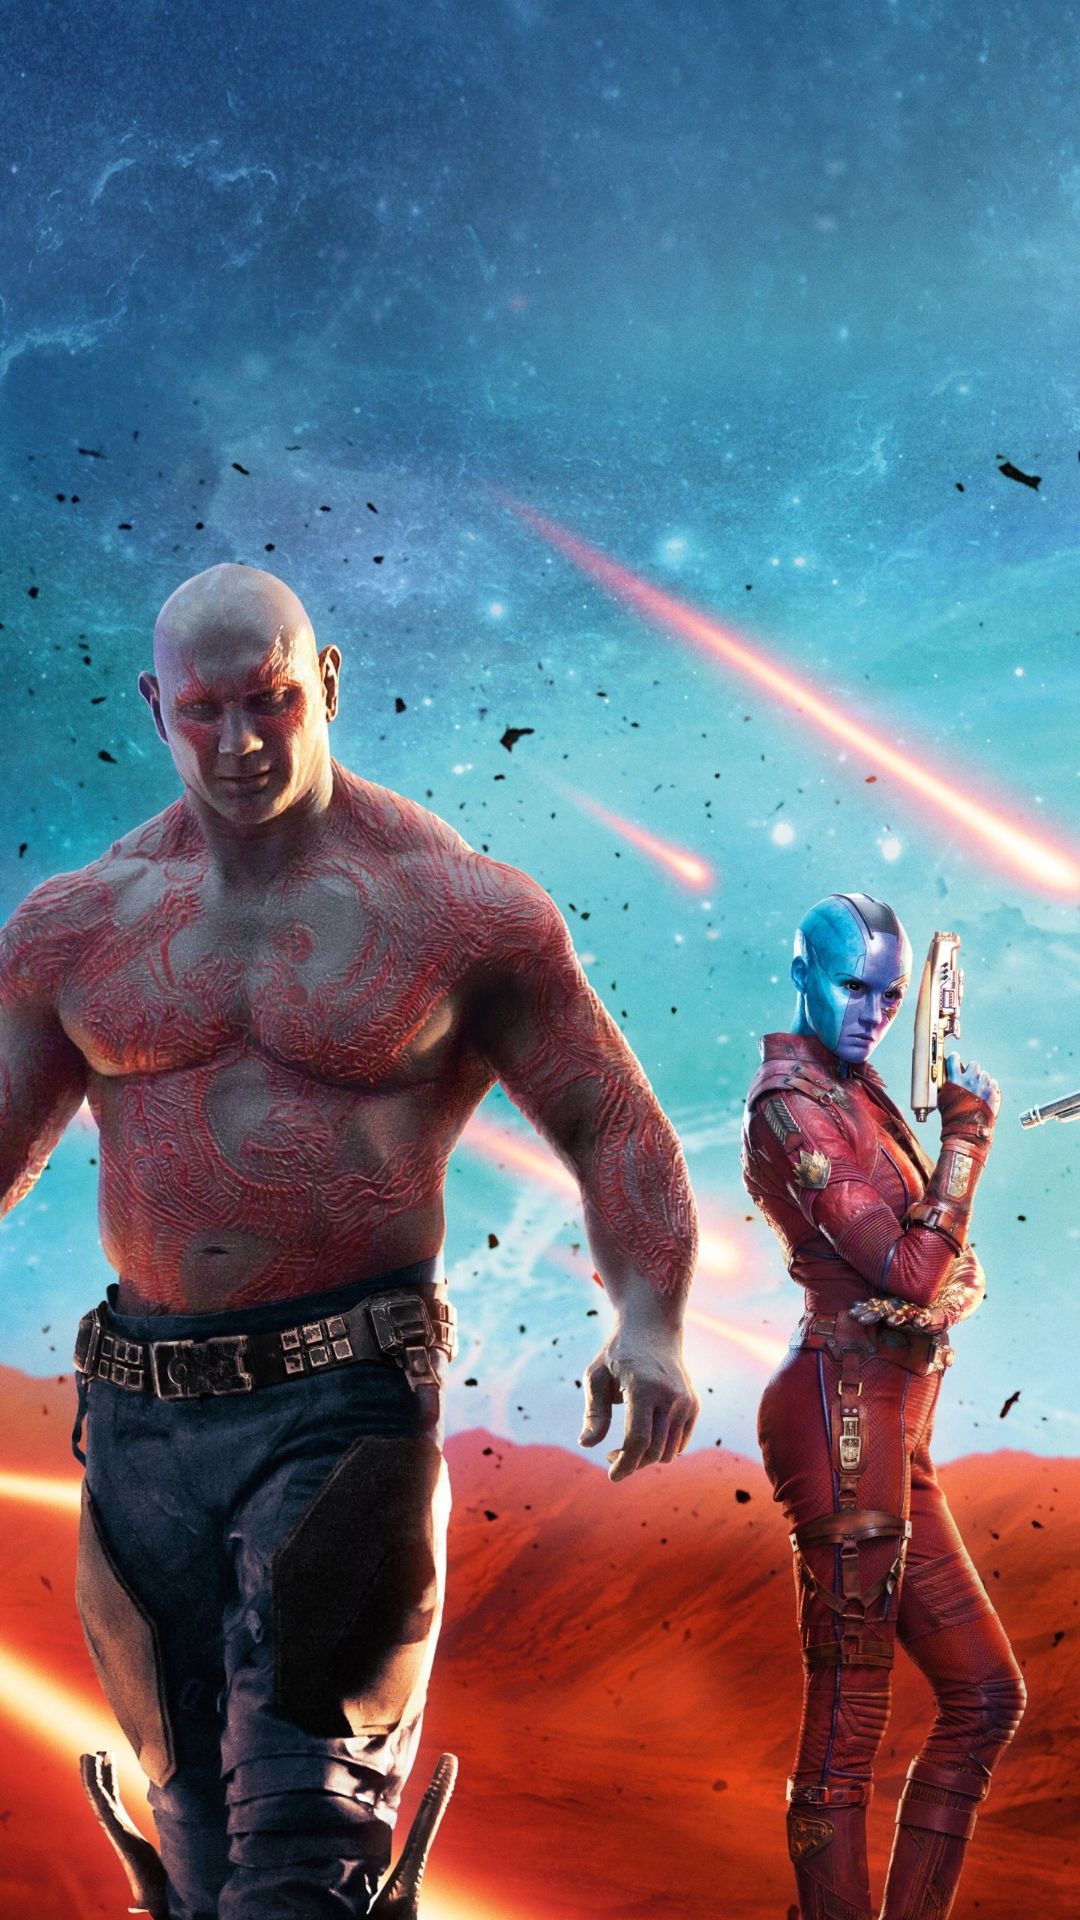 Drax the Destroyer, Wallpapers, Android mobile, Mobile wallpaper, 1080x1920 Full HD Phone